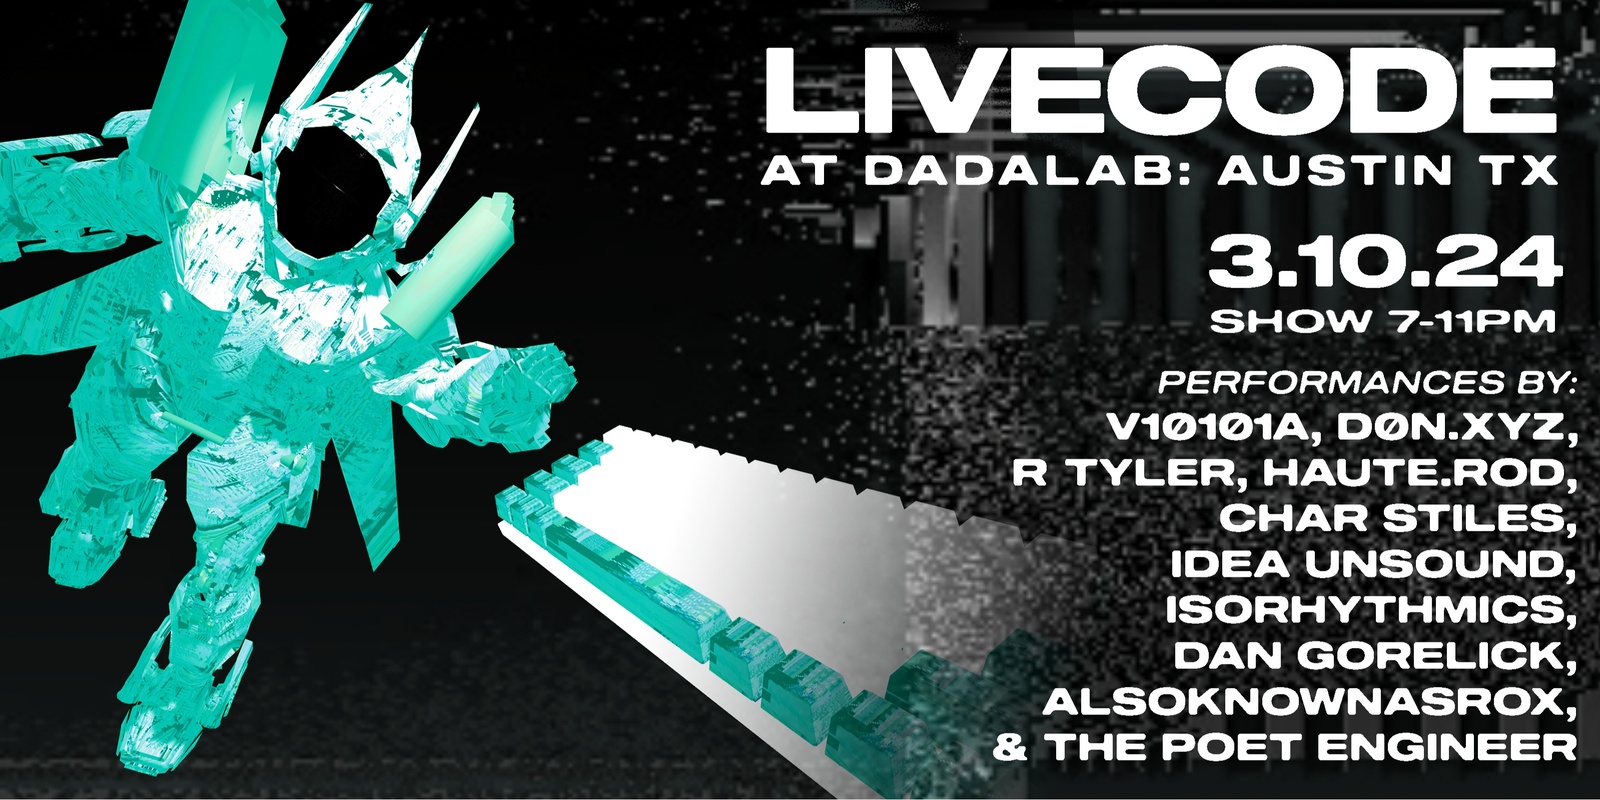 Banner image for Livecode at dadaLab